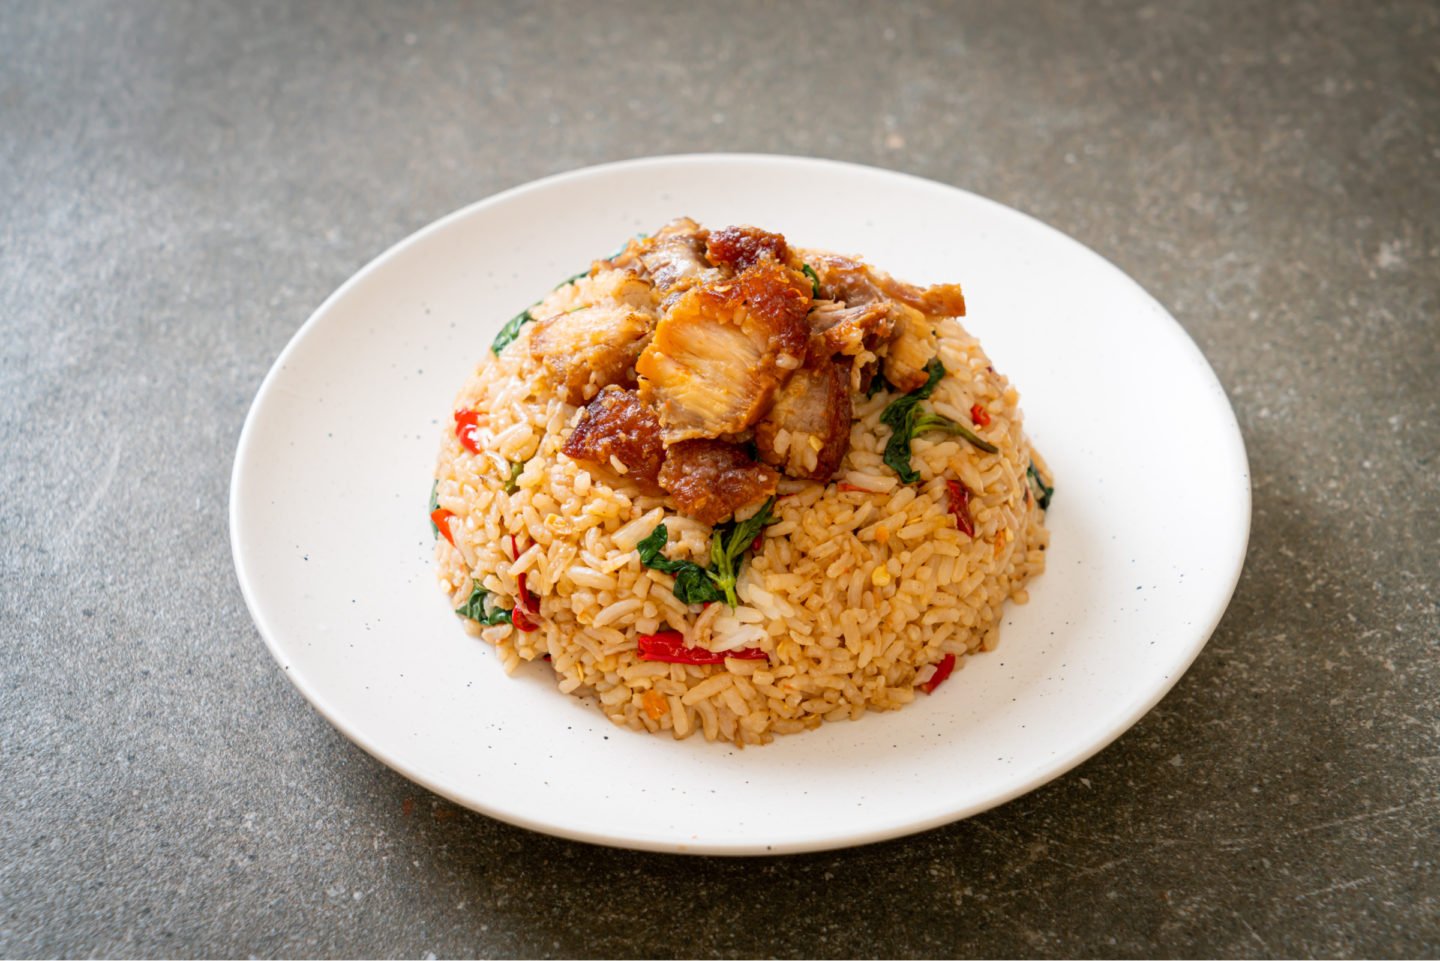 Pork And Vegetable Fried Rice